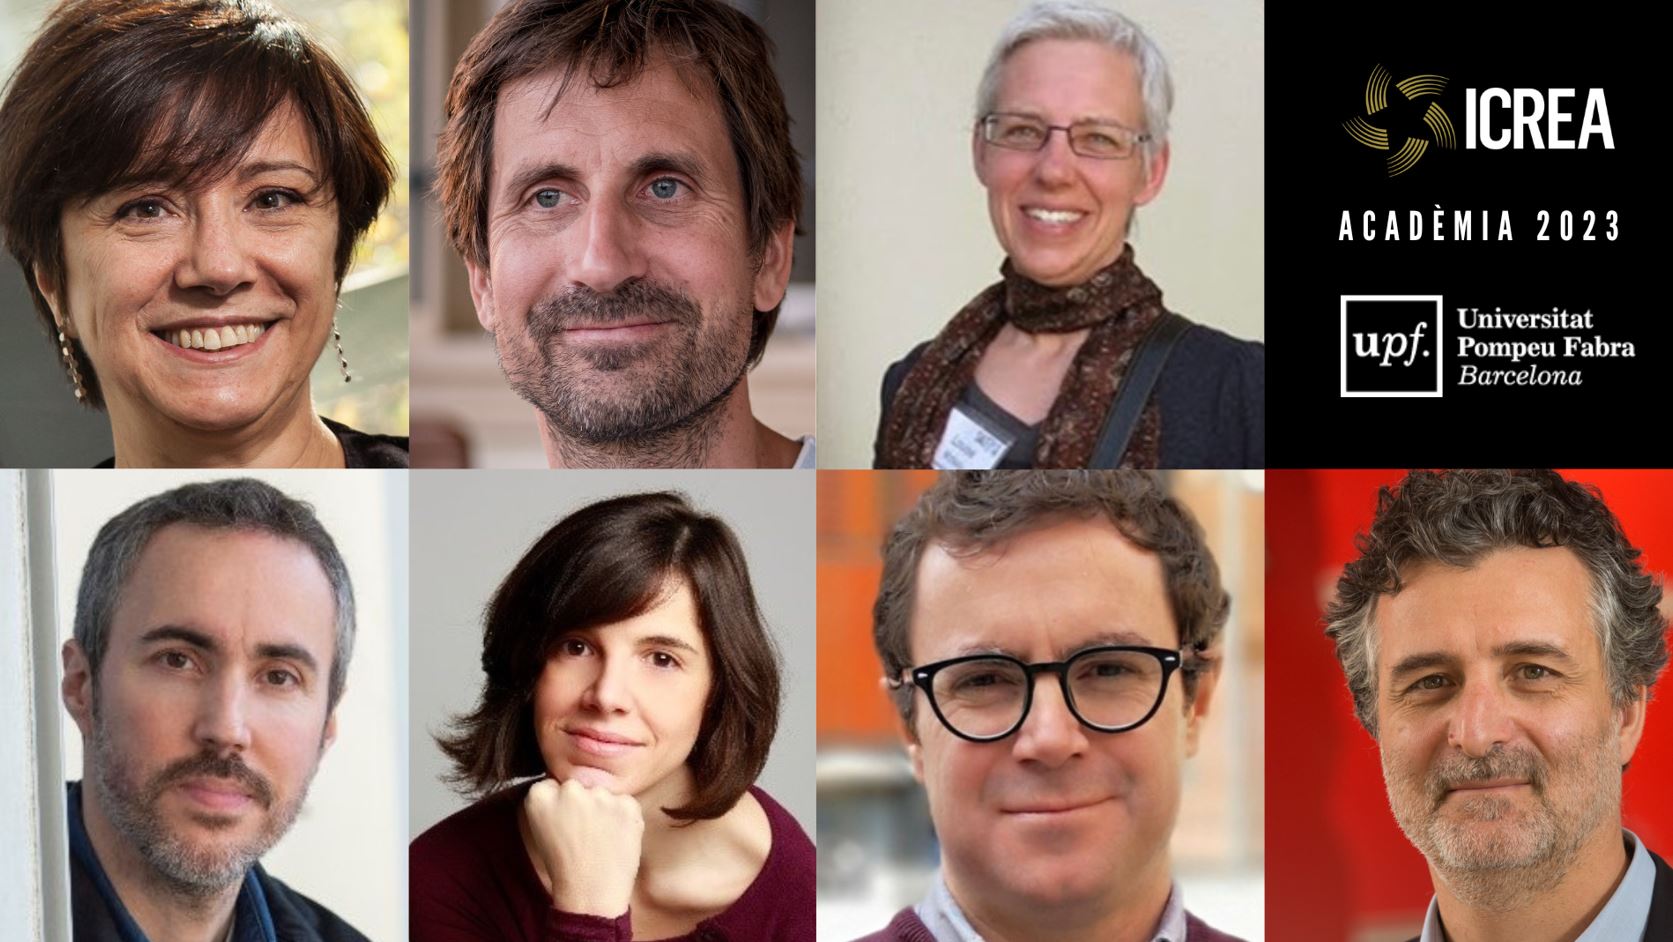 Seven UPF researchers may boost their talent thanks to the 2023 ICREA Academia grants